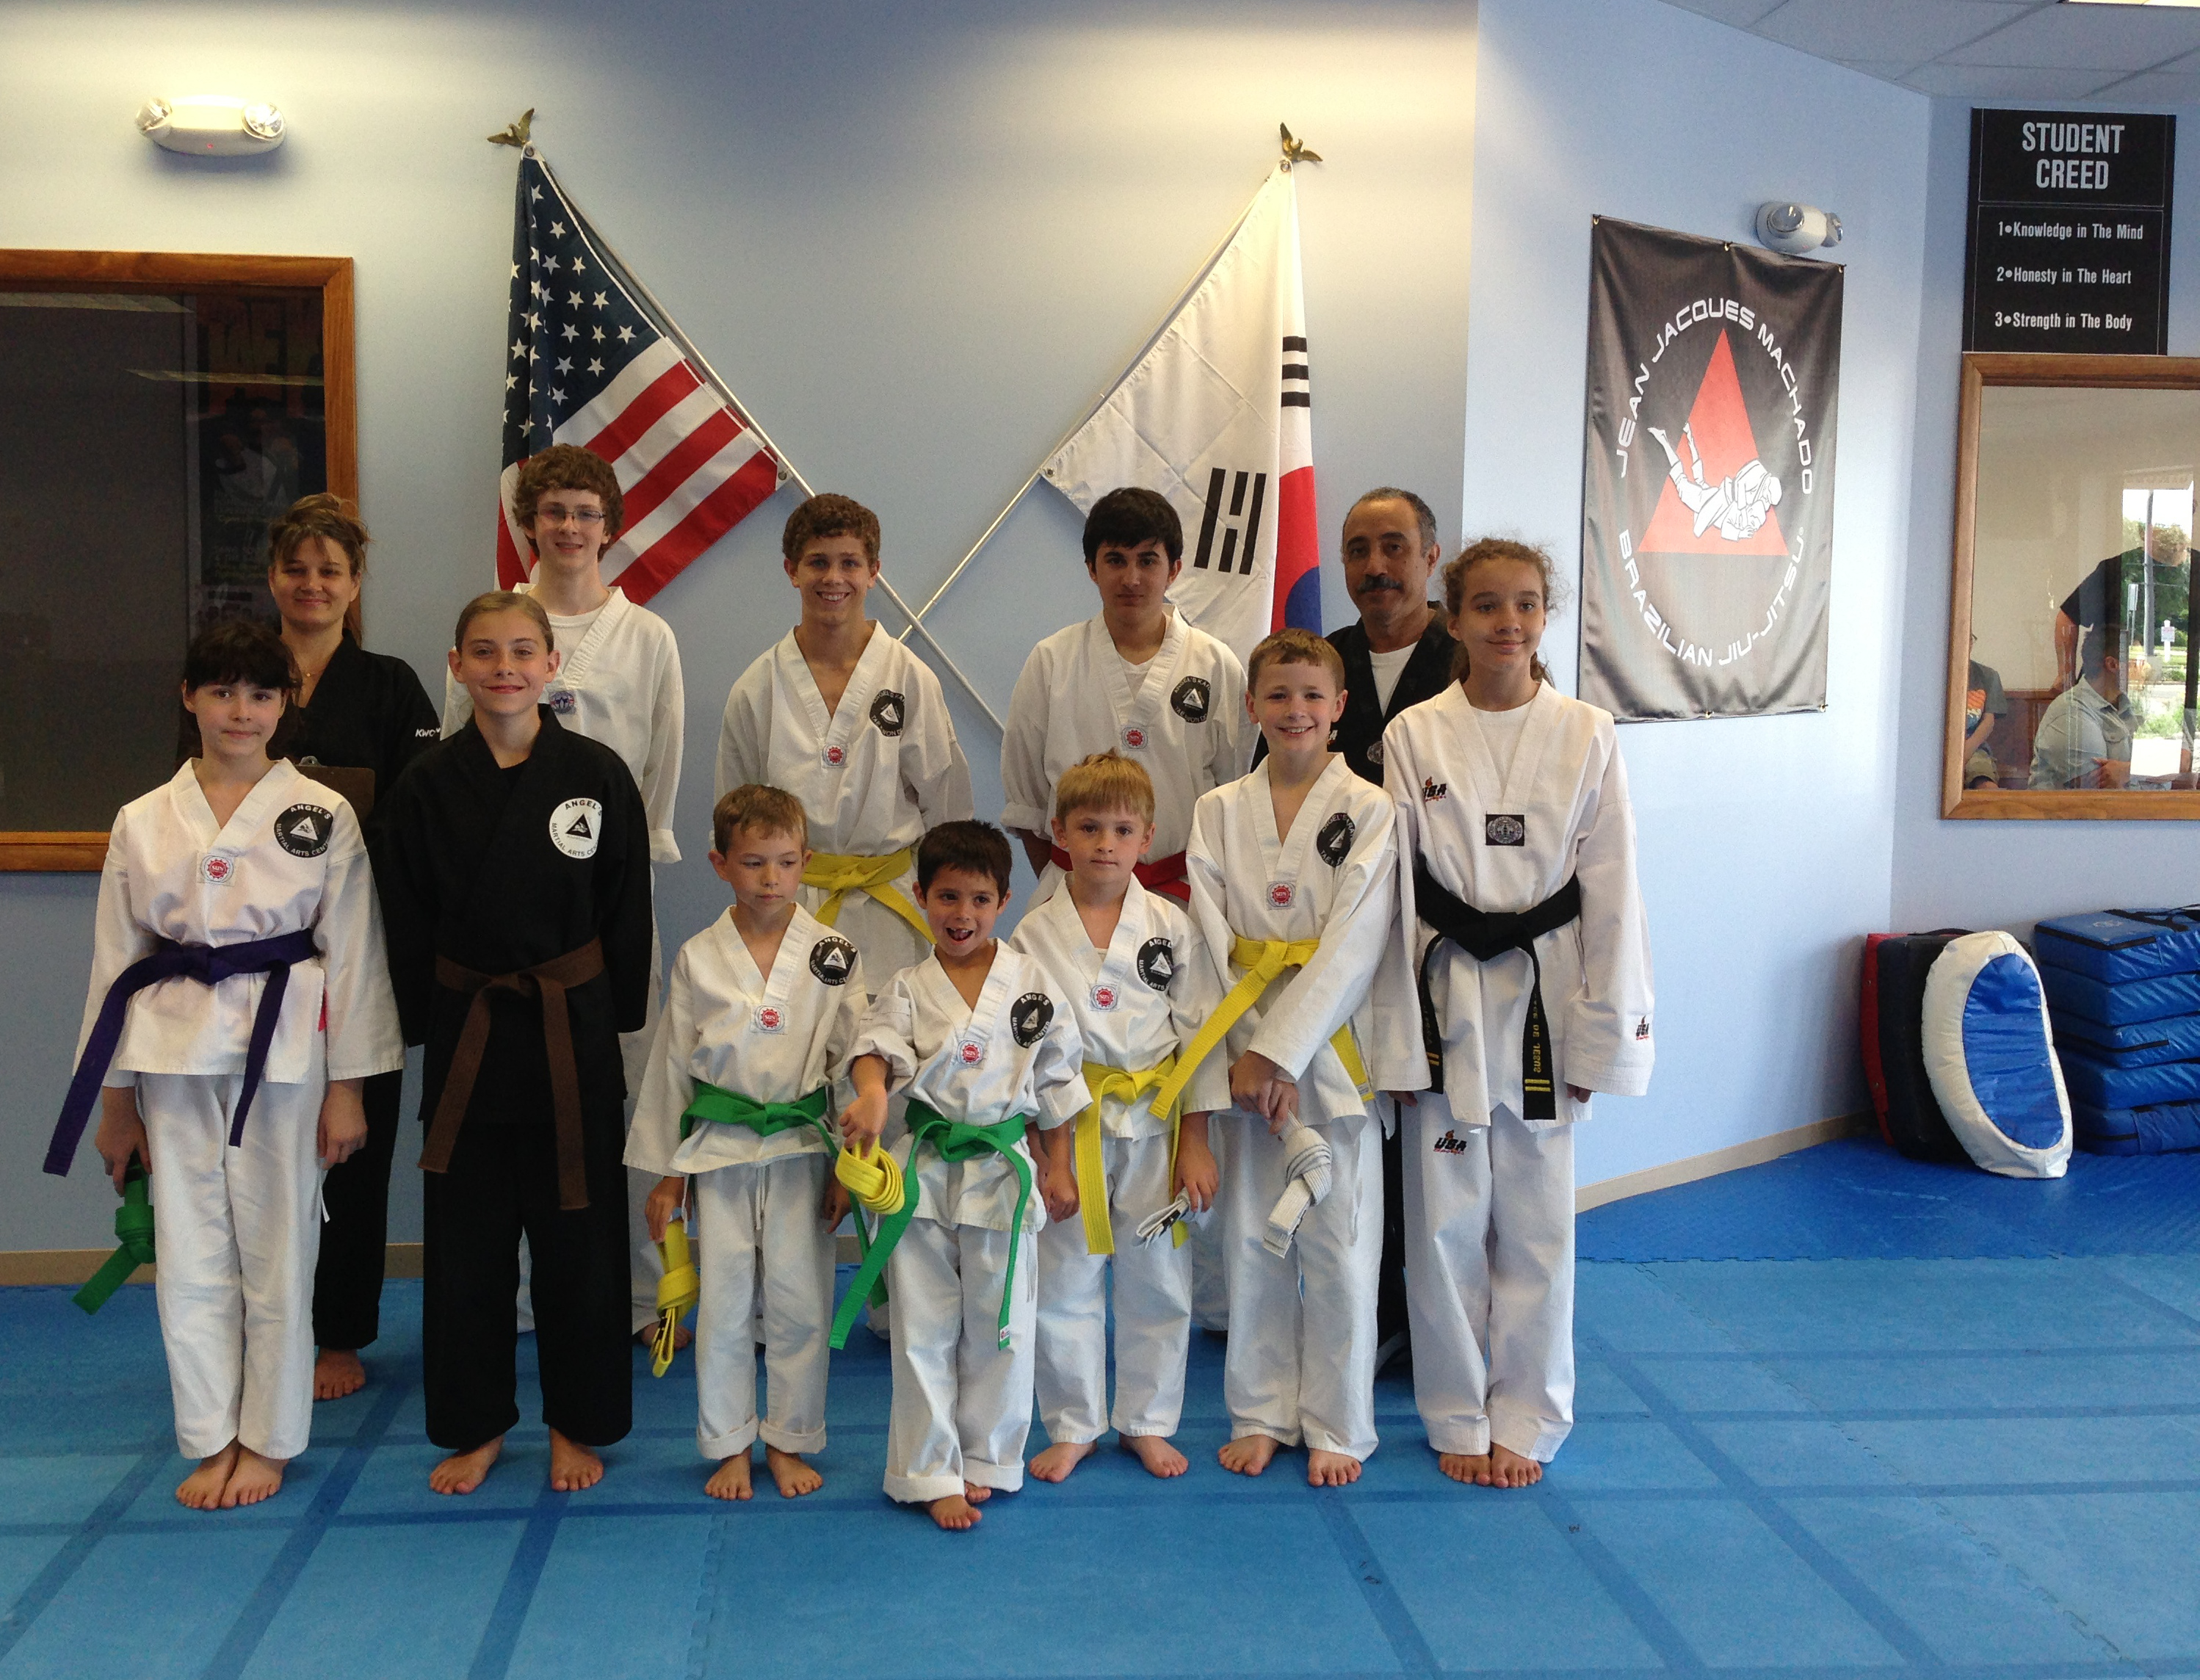 Another Exciting Taekwondo Promotion at Angel’s Karate